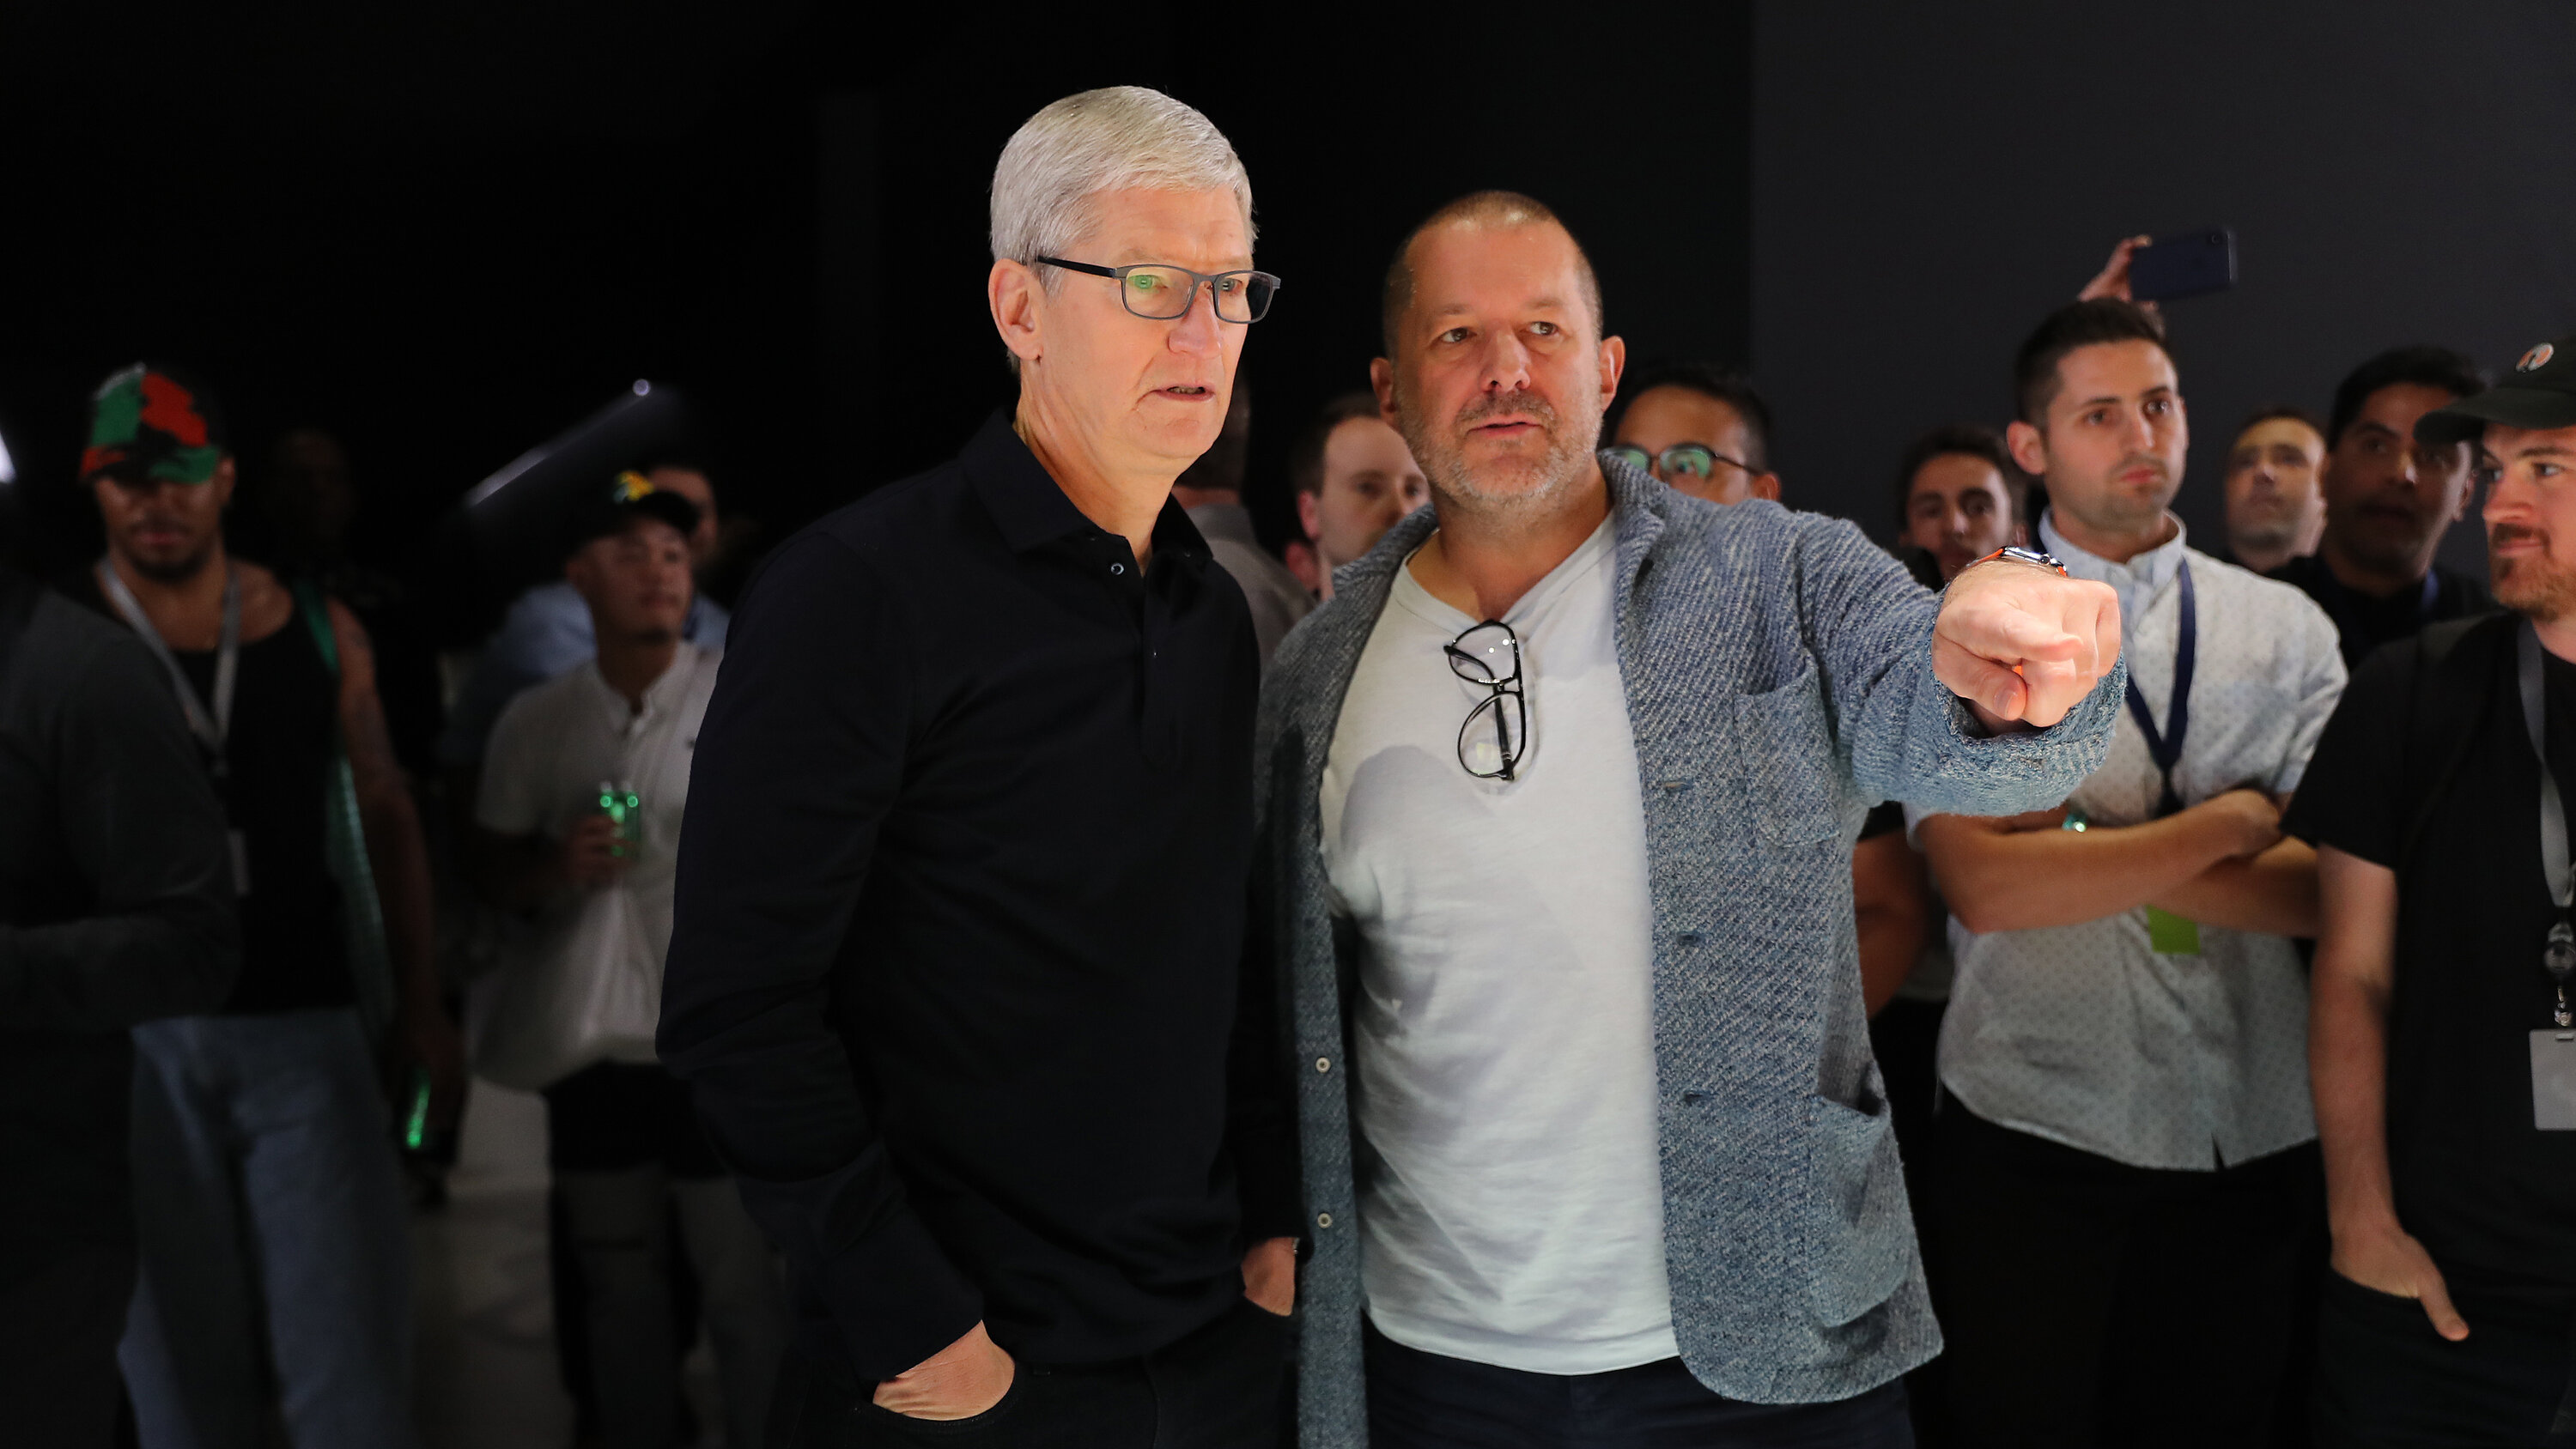 Jony Ive is working with Apple again: he's producing a cartoon for Apple TV+ with Idris Elba, Woody Harrelson, and J.J. Abrams